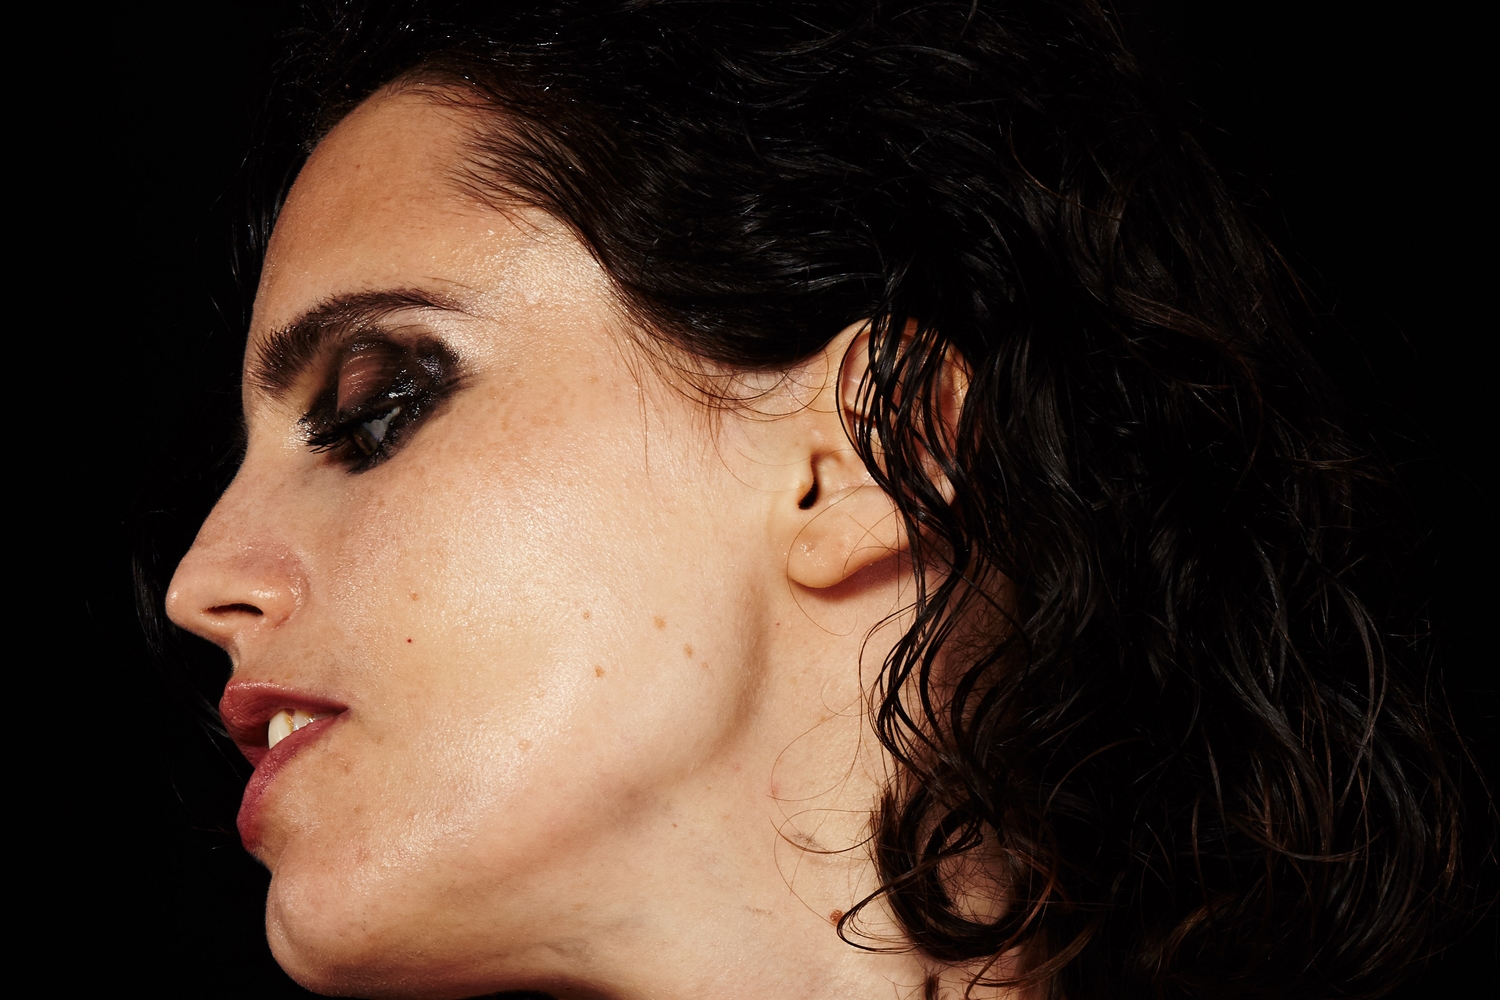 Anna Calvi announces new album ‘Hunter’ with single ‘Don’t Beat The Girl Out Of My Boy’